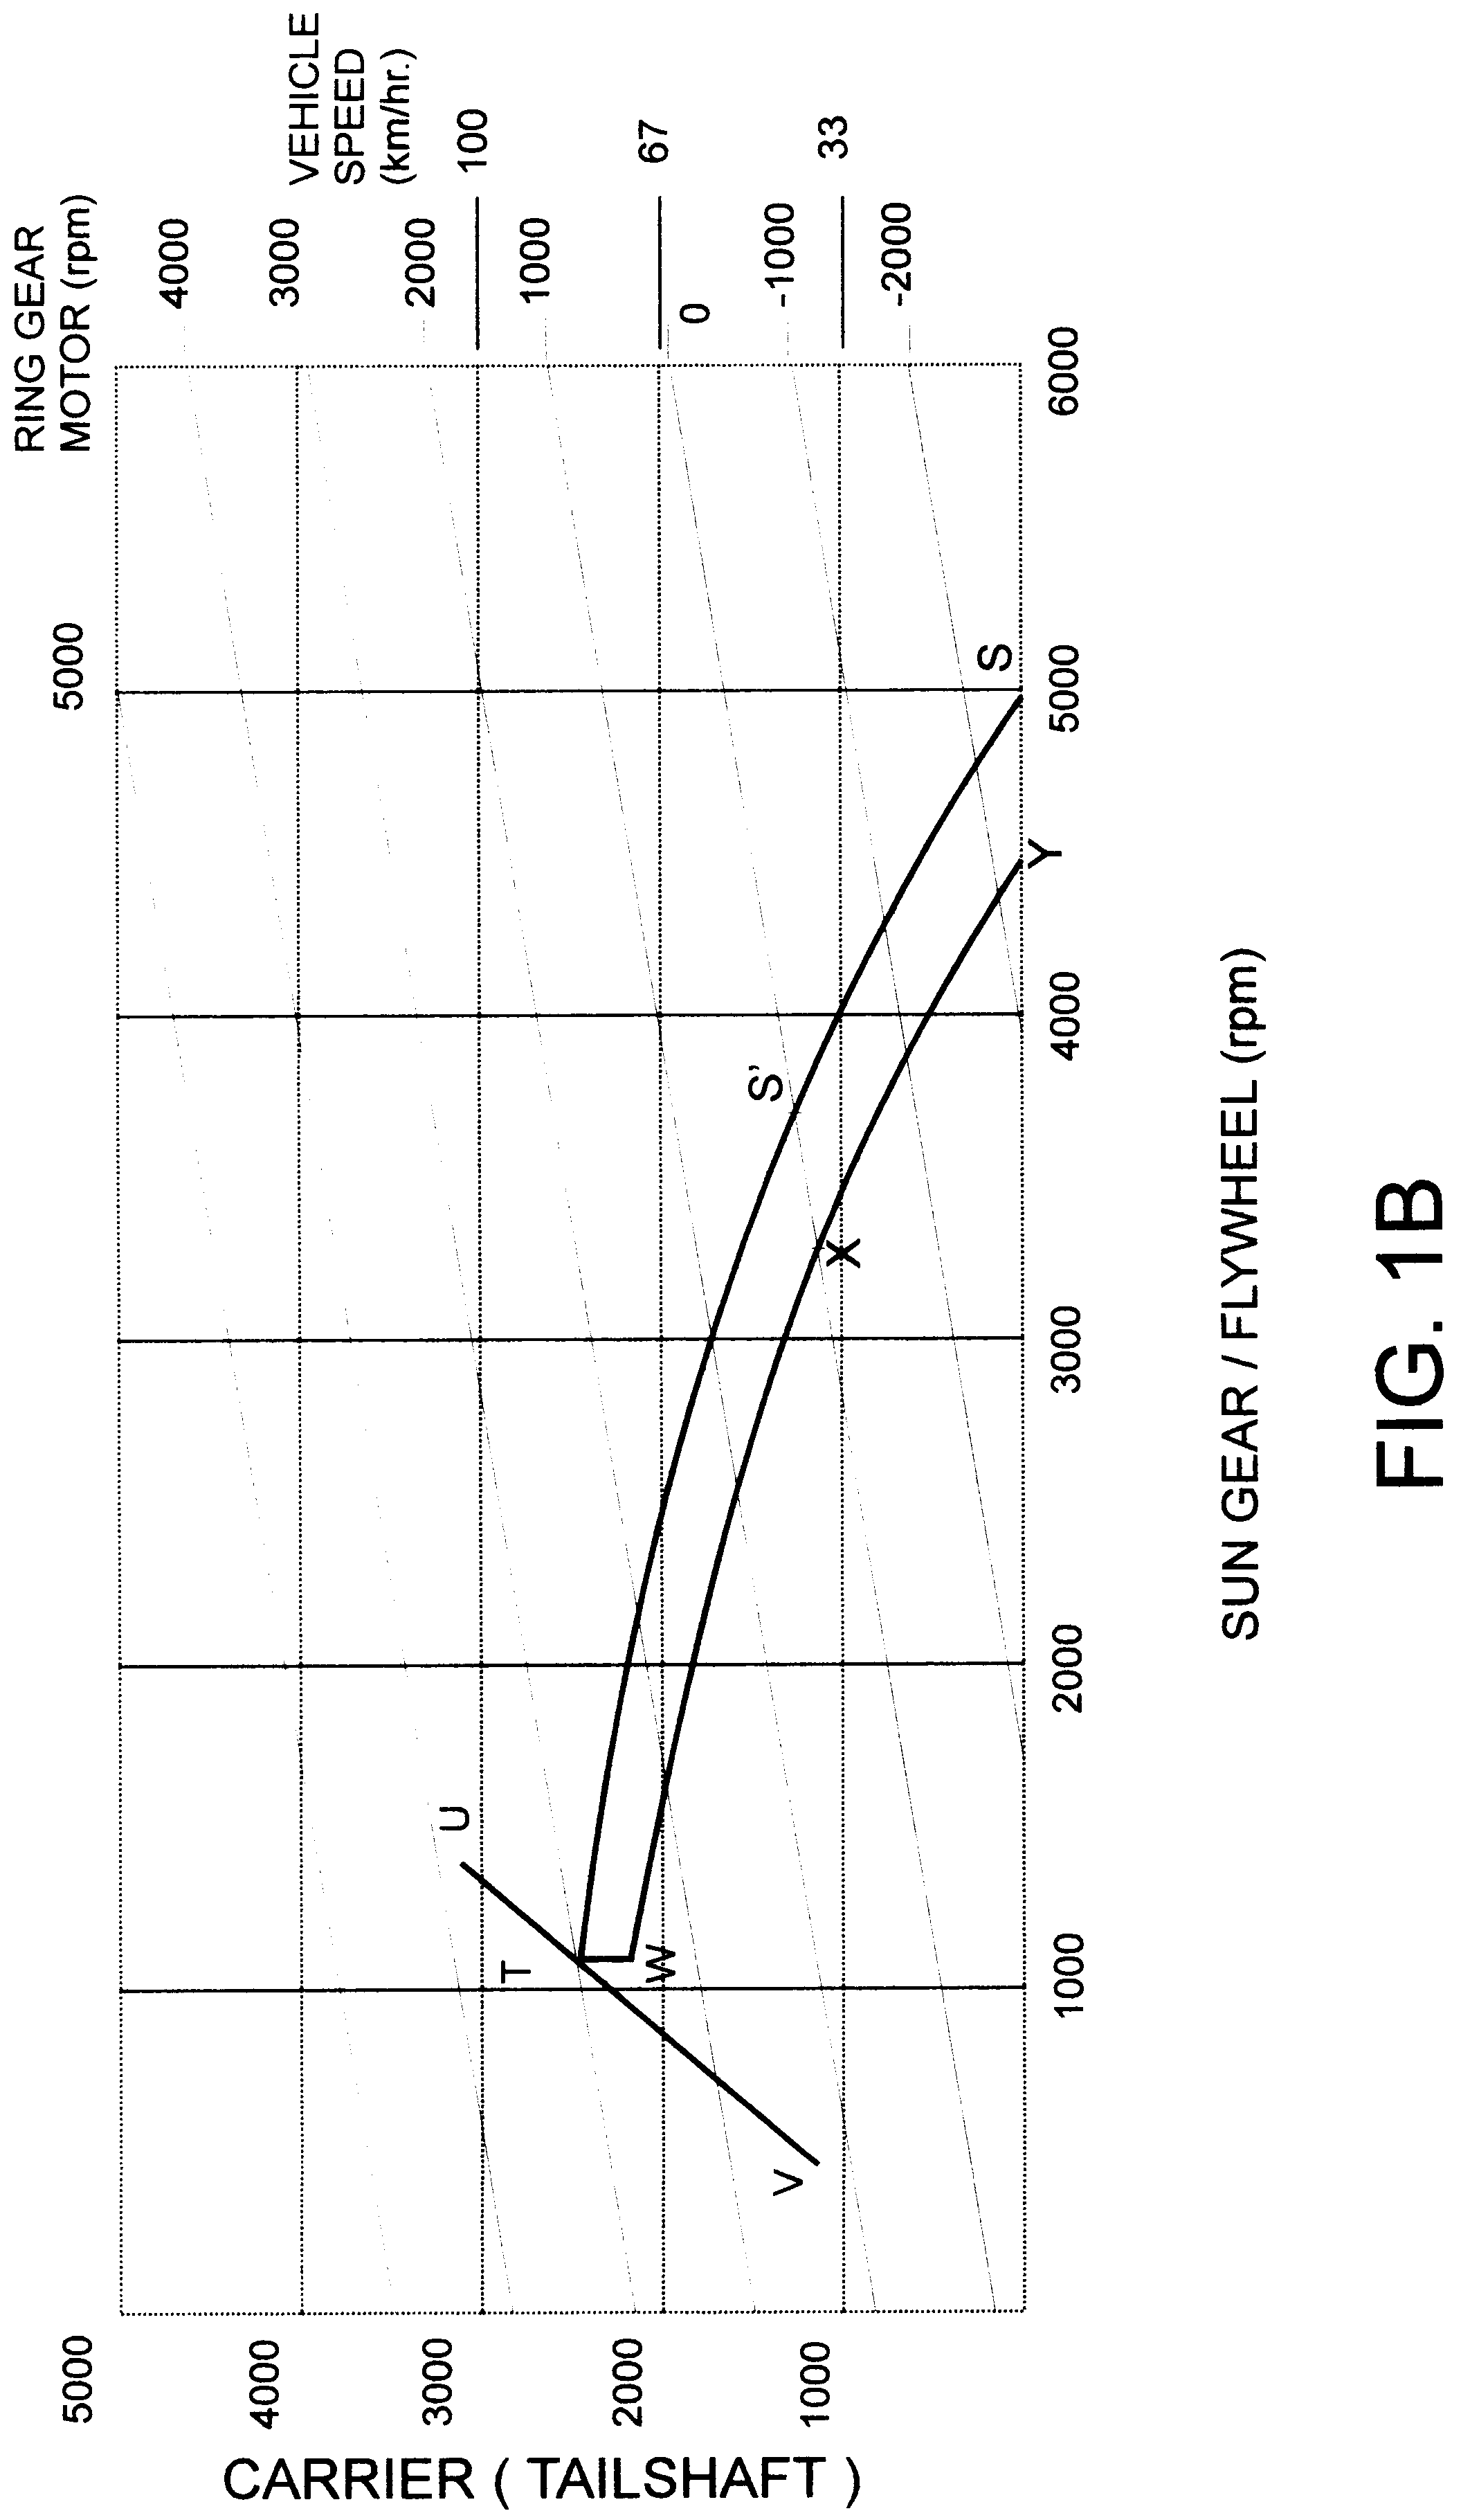 Hybrid propulsion system for road vehicles